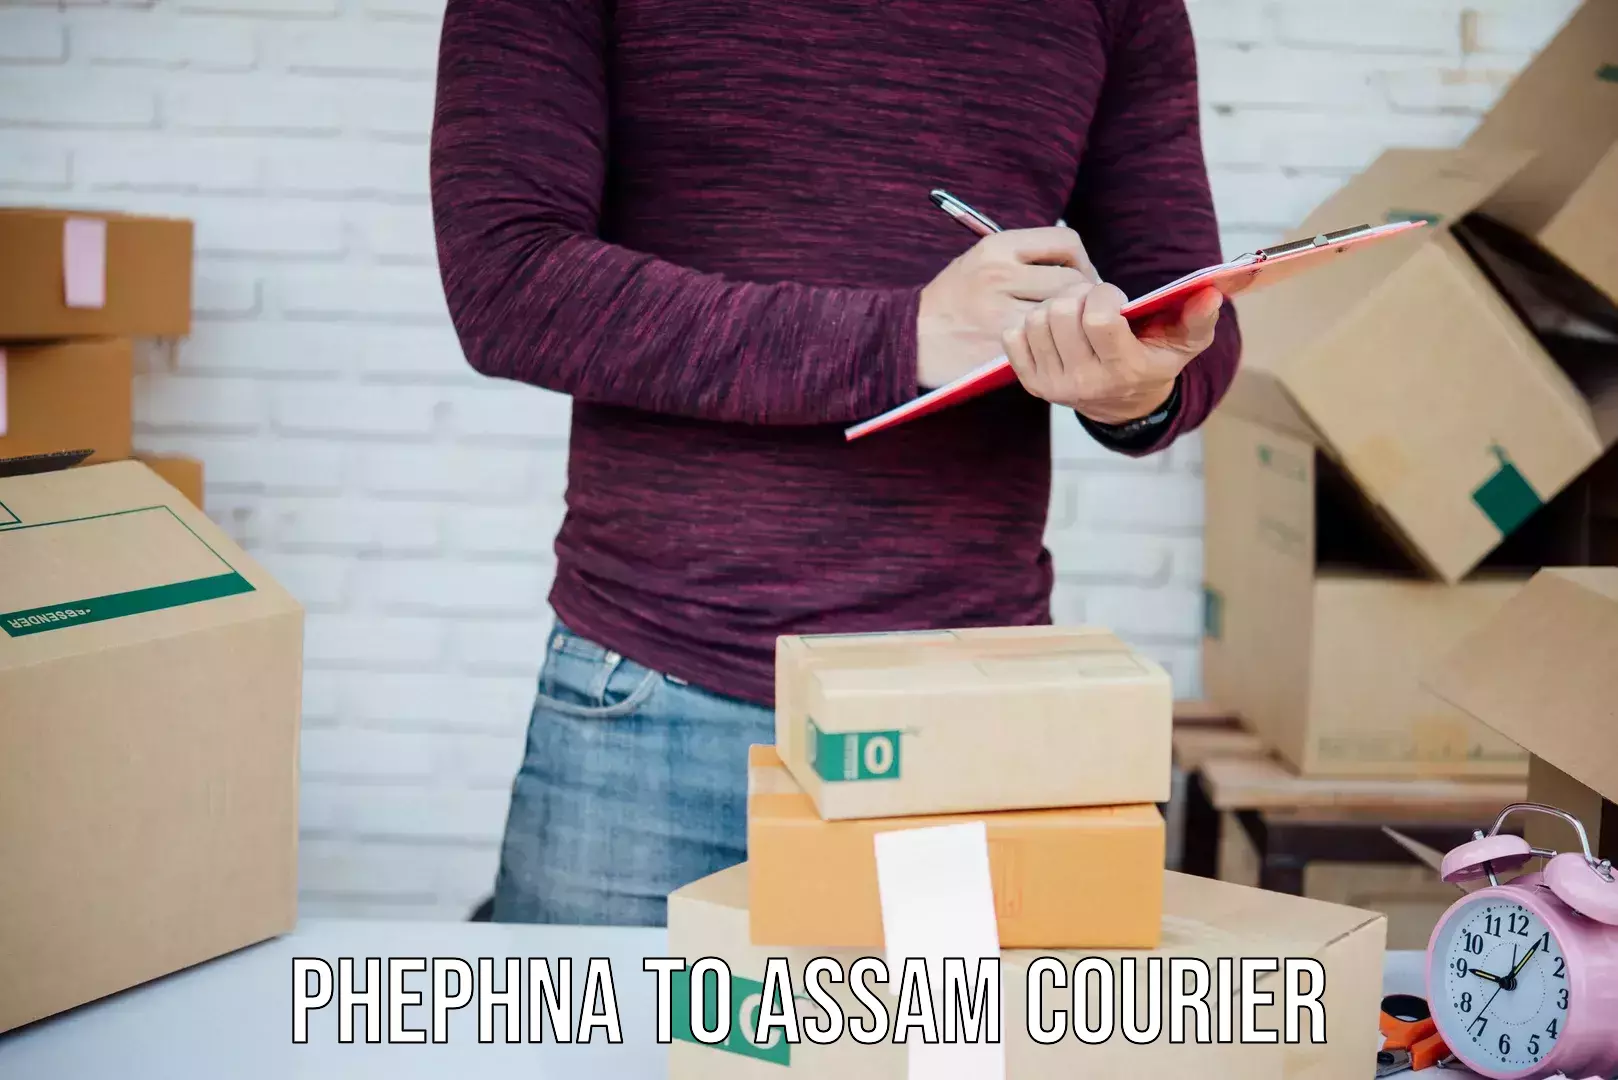 Customized delivery solutions Phephna to Lala Assam